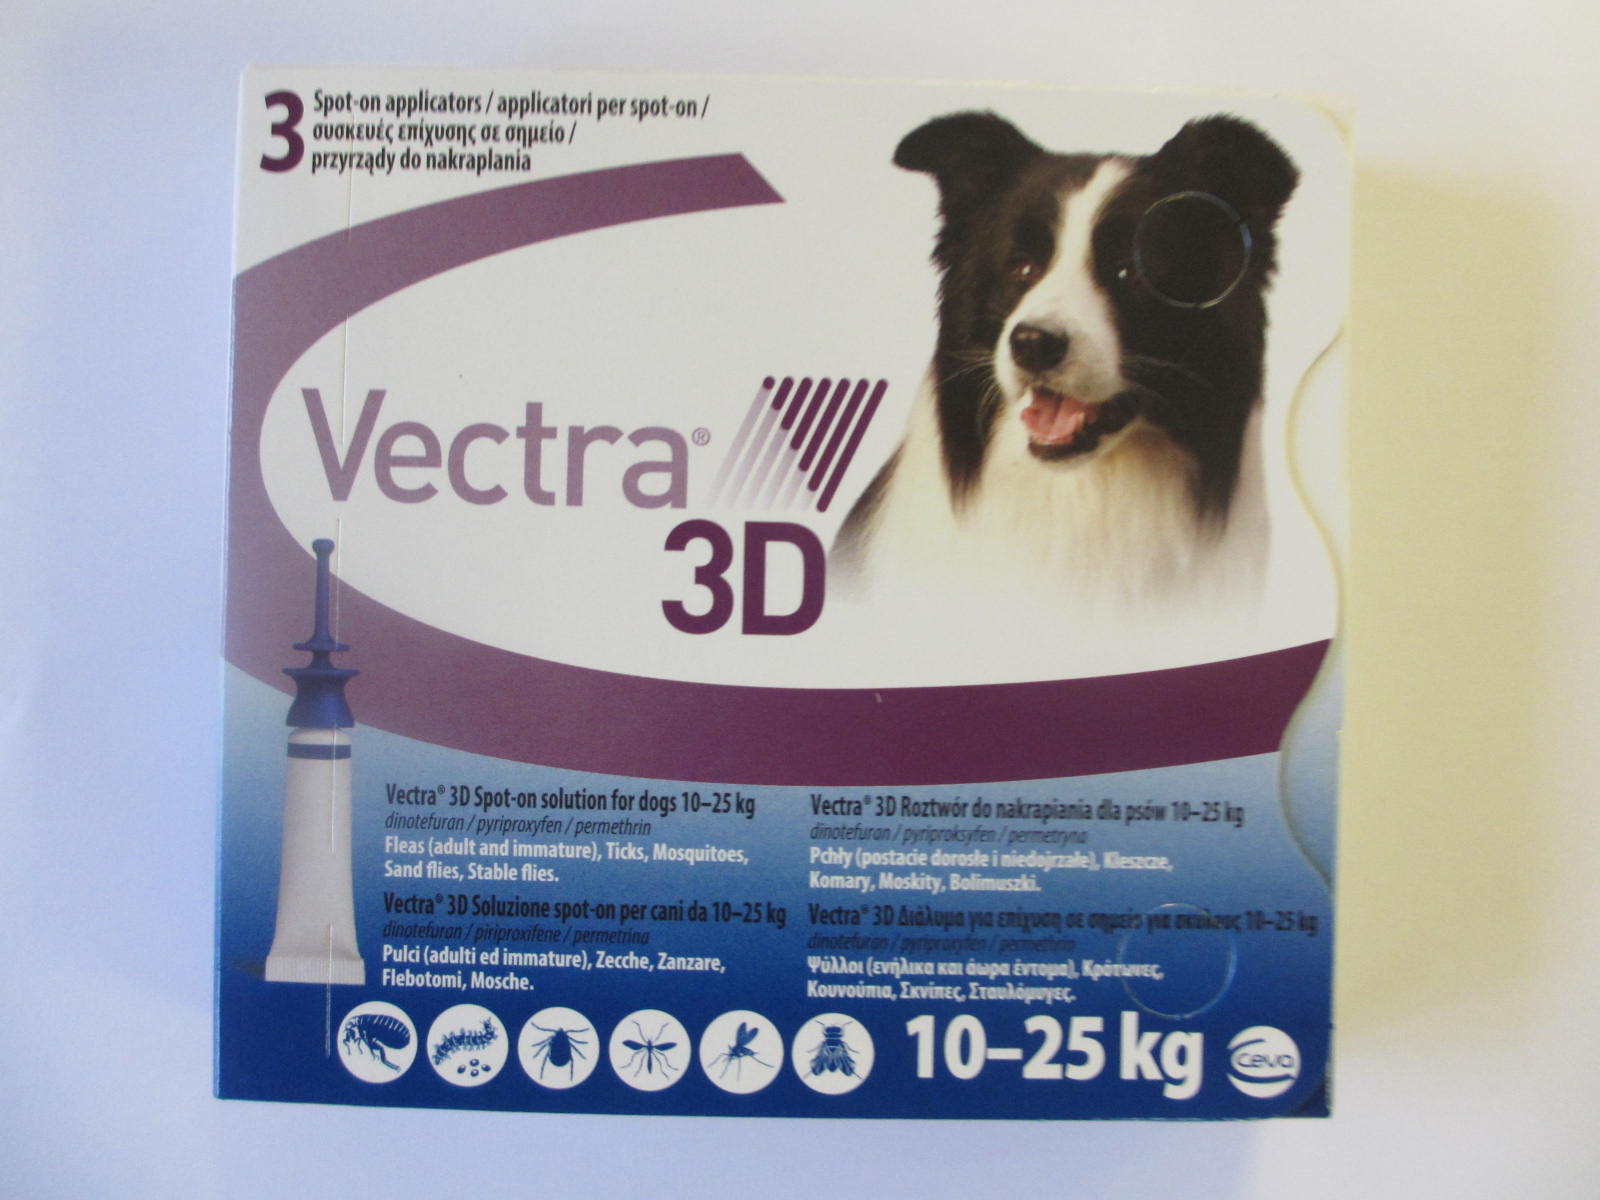 Vectra 3D for Dogs - 21 - 55 lbs - Blue - 3 pack - $40.50 | Flea & Tick